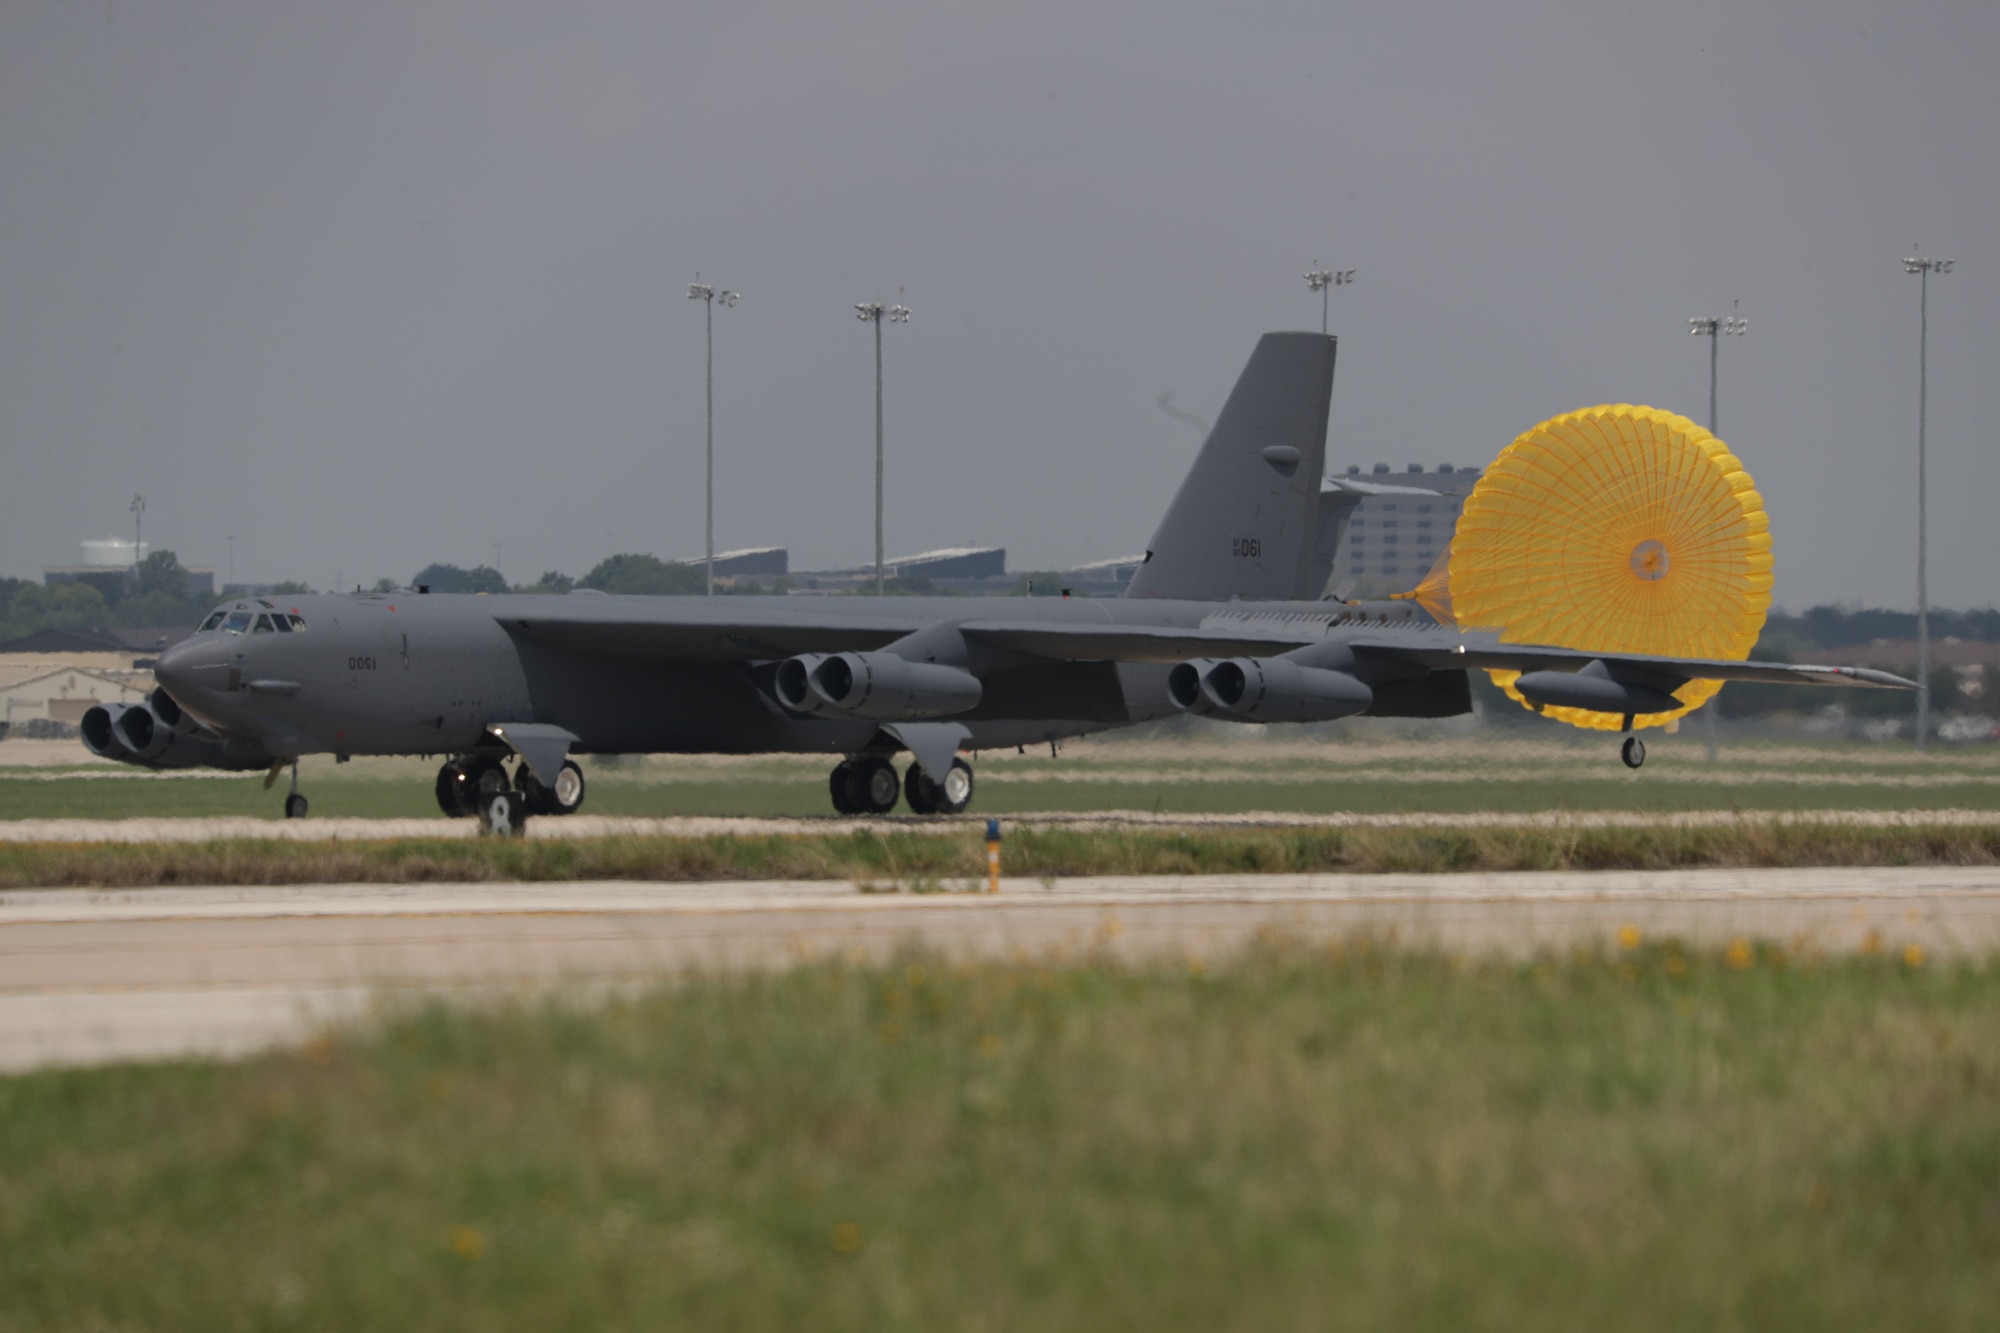 A B-52 arrives at Joint Base San Antonio. The aircraft will undergo installation of a new radar system at a nearby Boeing facility. (Courtesy photo by the Boeing Co.)